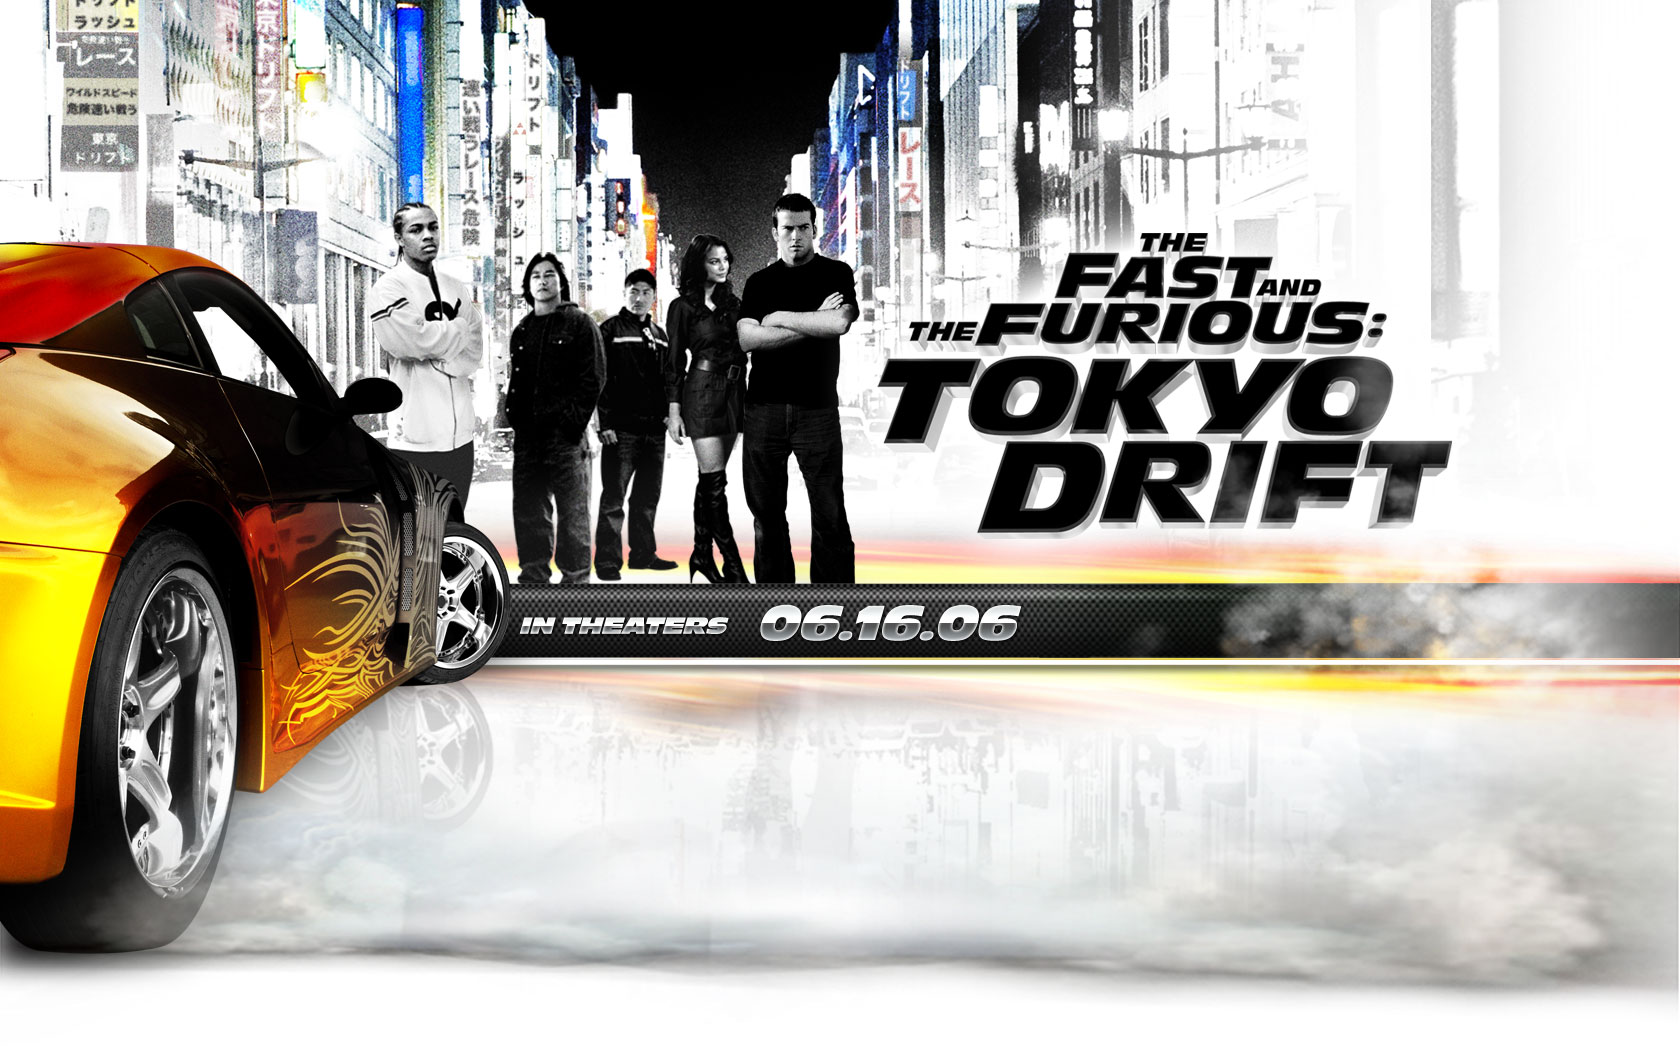 The Fast And The Furious: Tokyo Drift #24